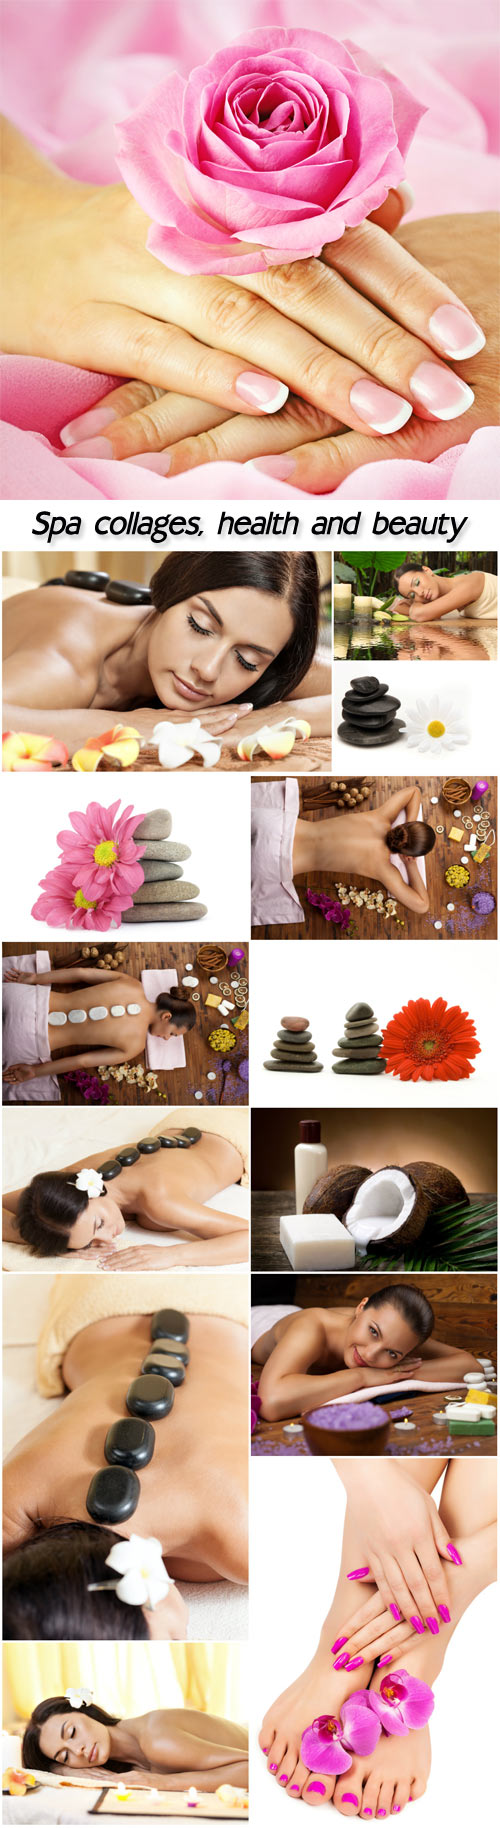 Spa collages, health and beauty, women